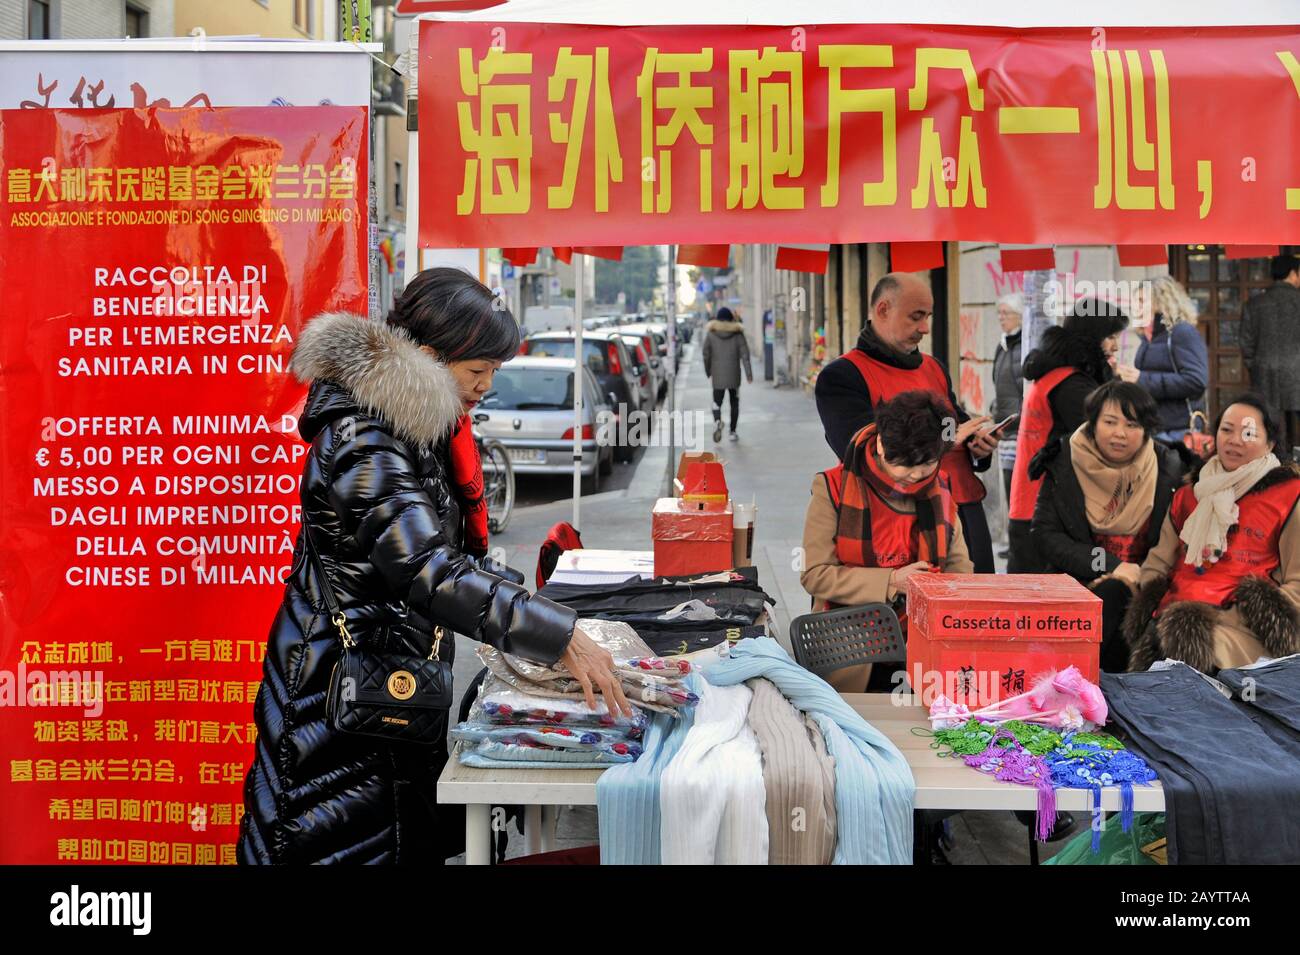 Milan (Italy), February 2020, Chinatown in Paolo Sarpi street, stall for collecting donations in favour of the victims of the Coronavirus epidemic in China Stock Photo